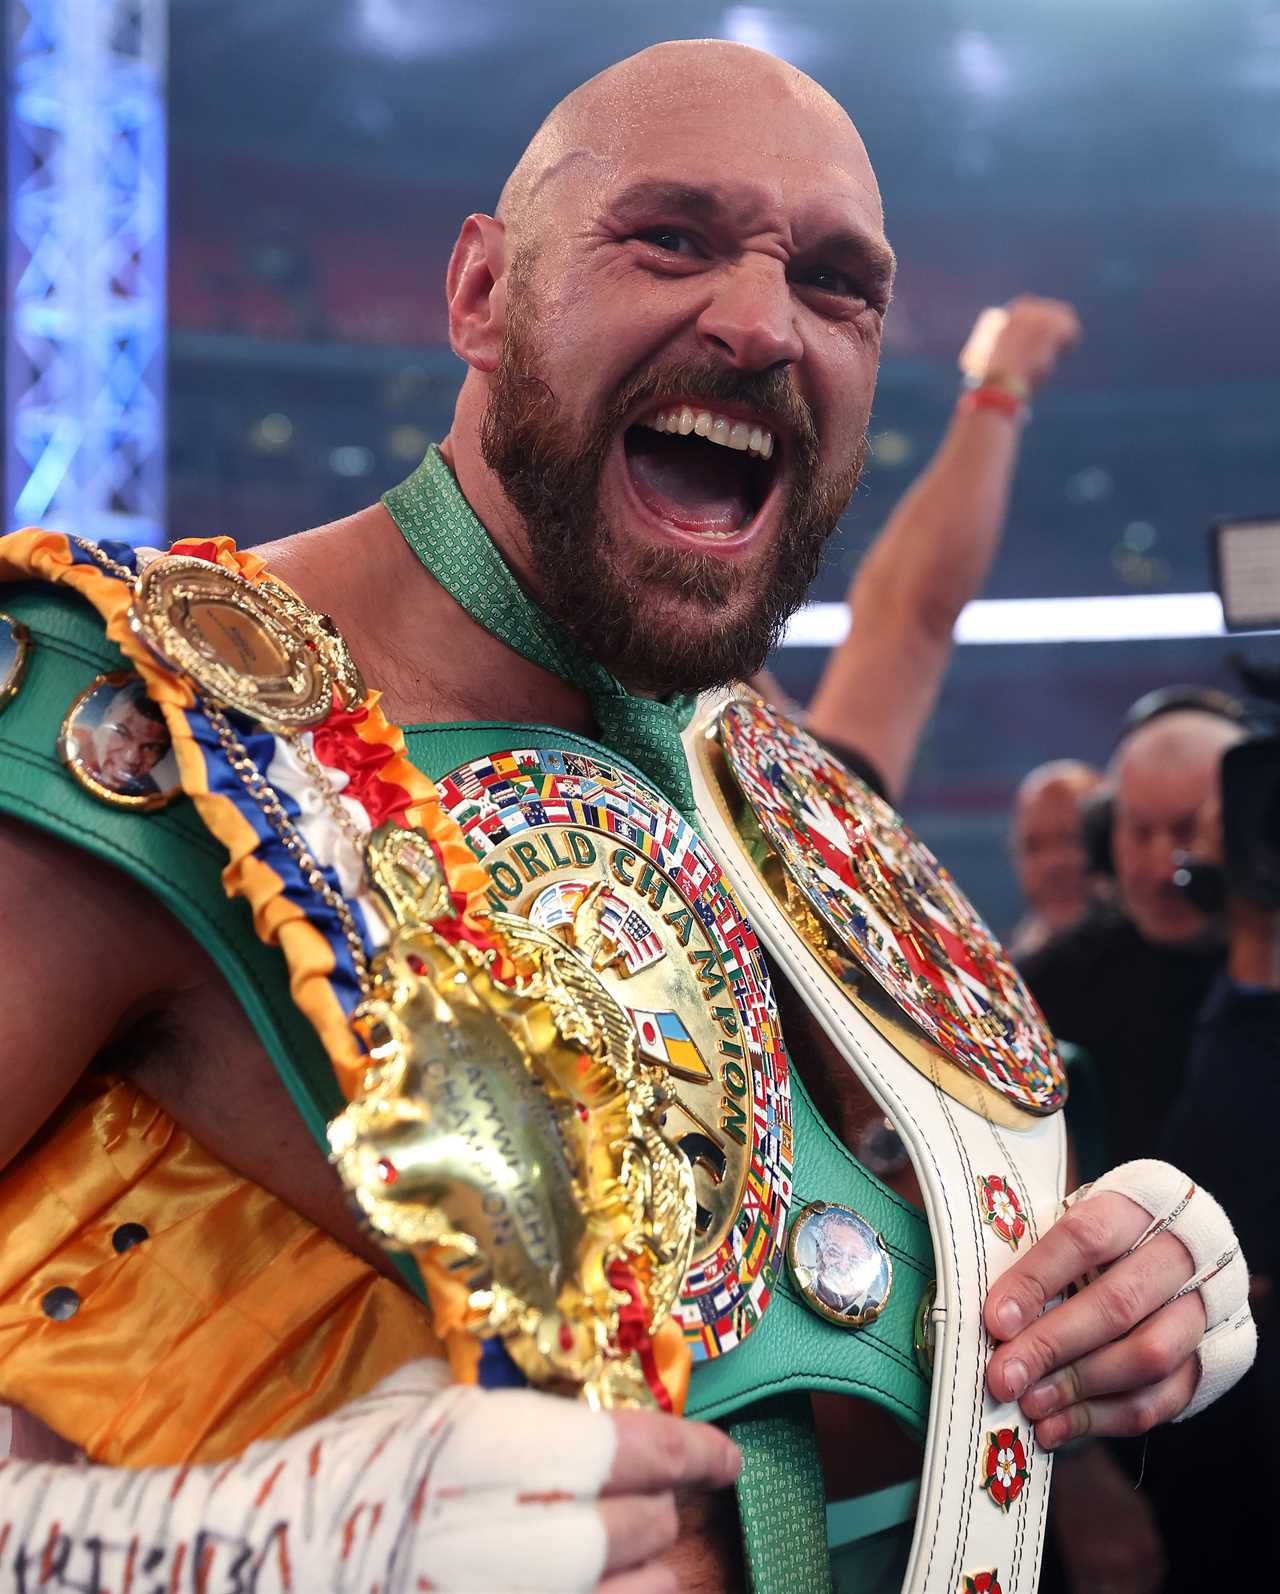 Promoter Eddie Hearn claims that Tyson Fury has offered Derek Chisora a trilogy fight, but it's not enough money.